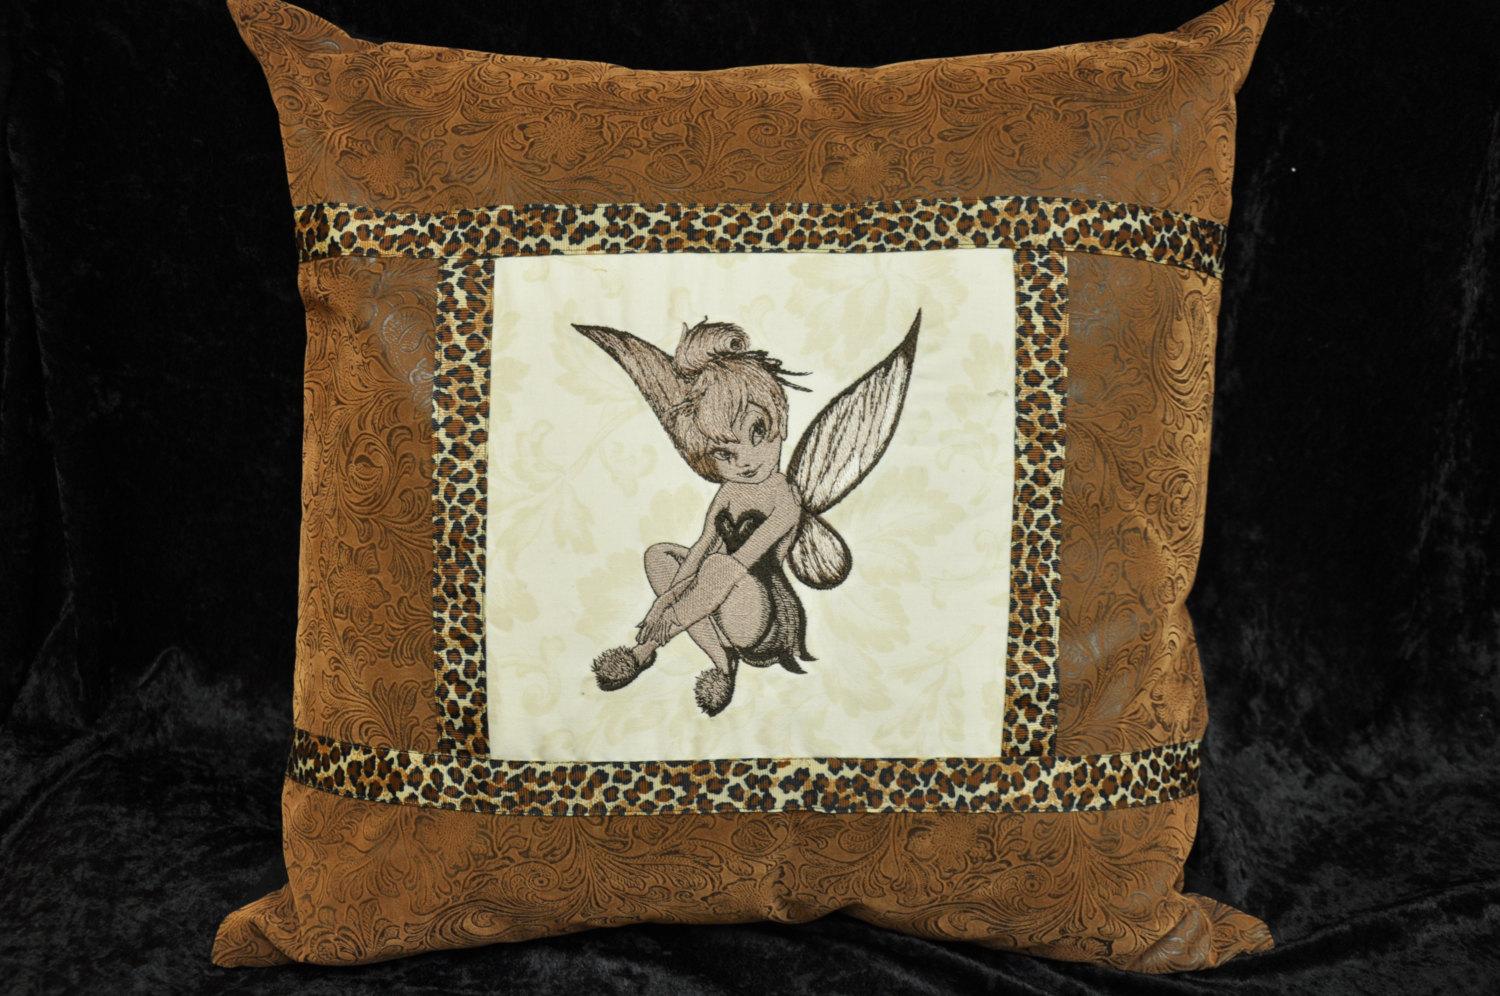 Embroidered pillow.with Fairy design